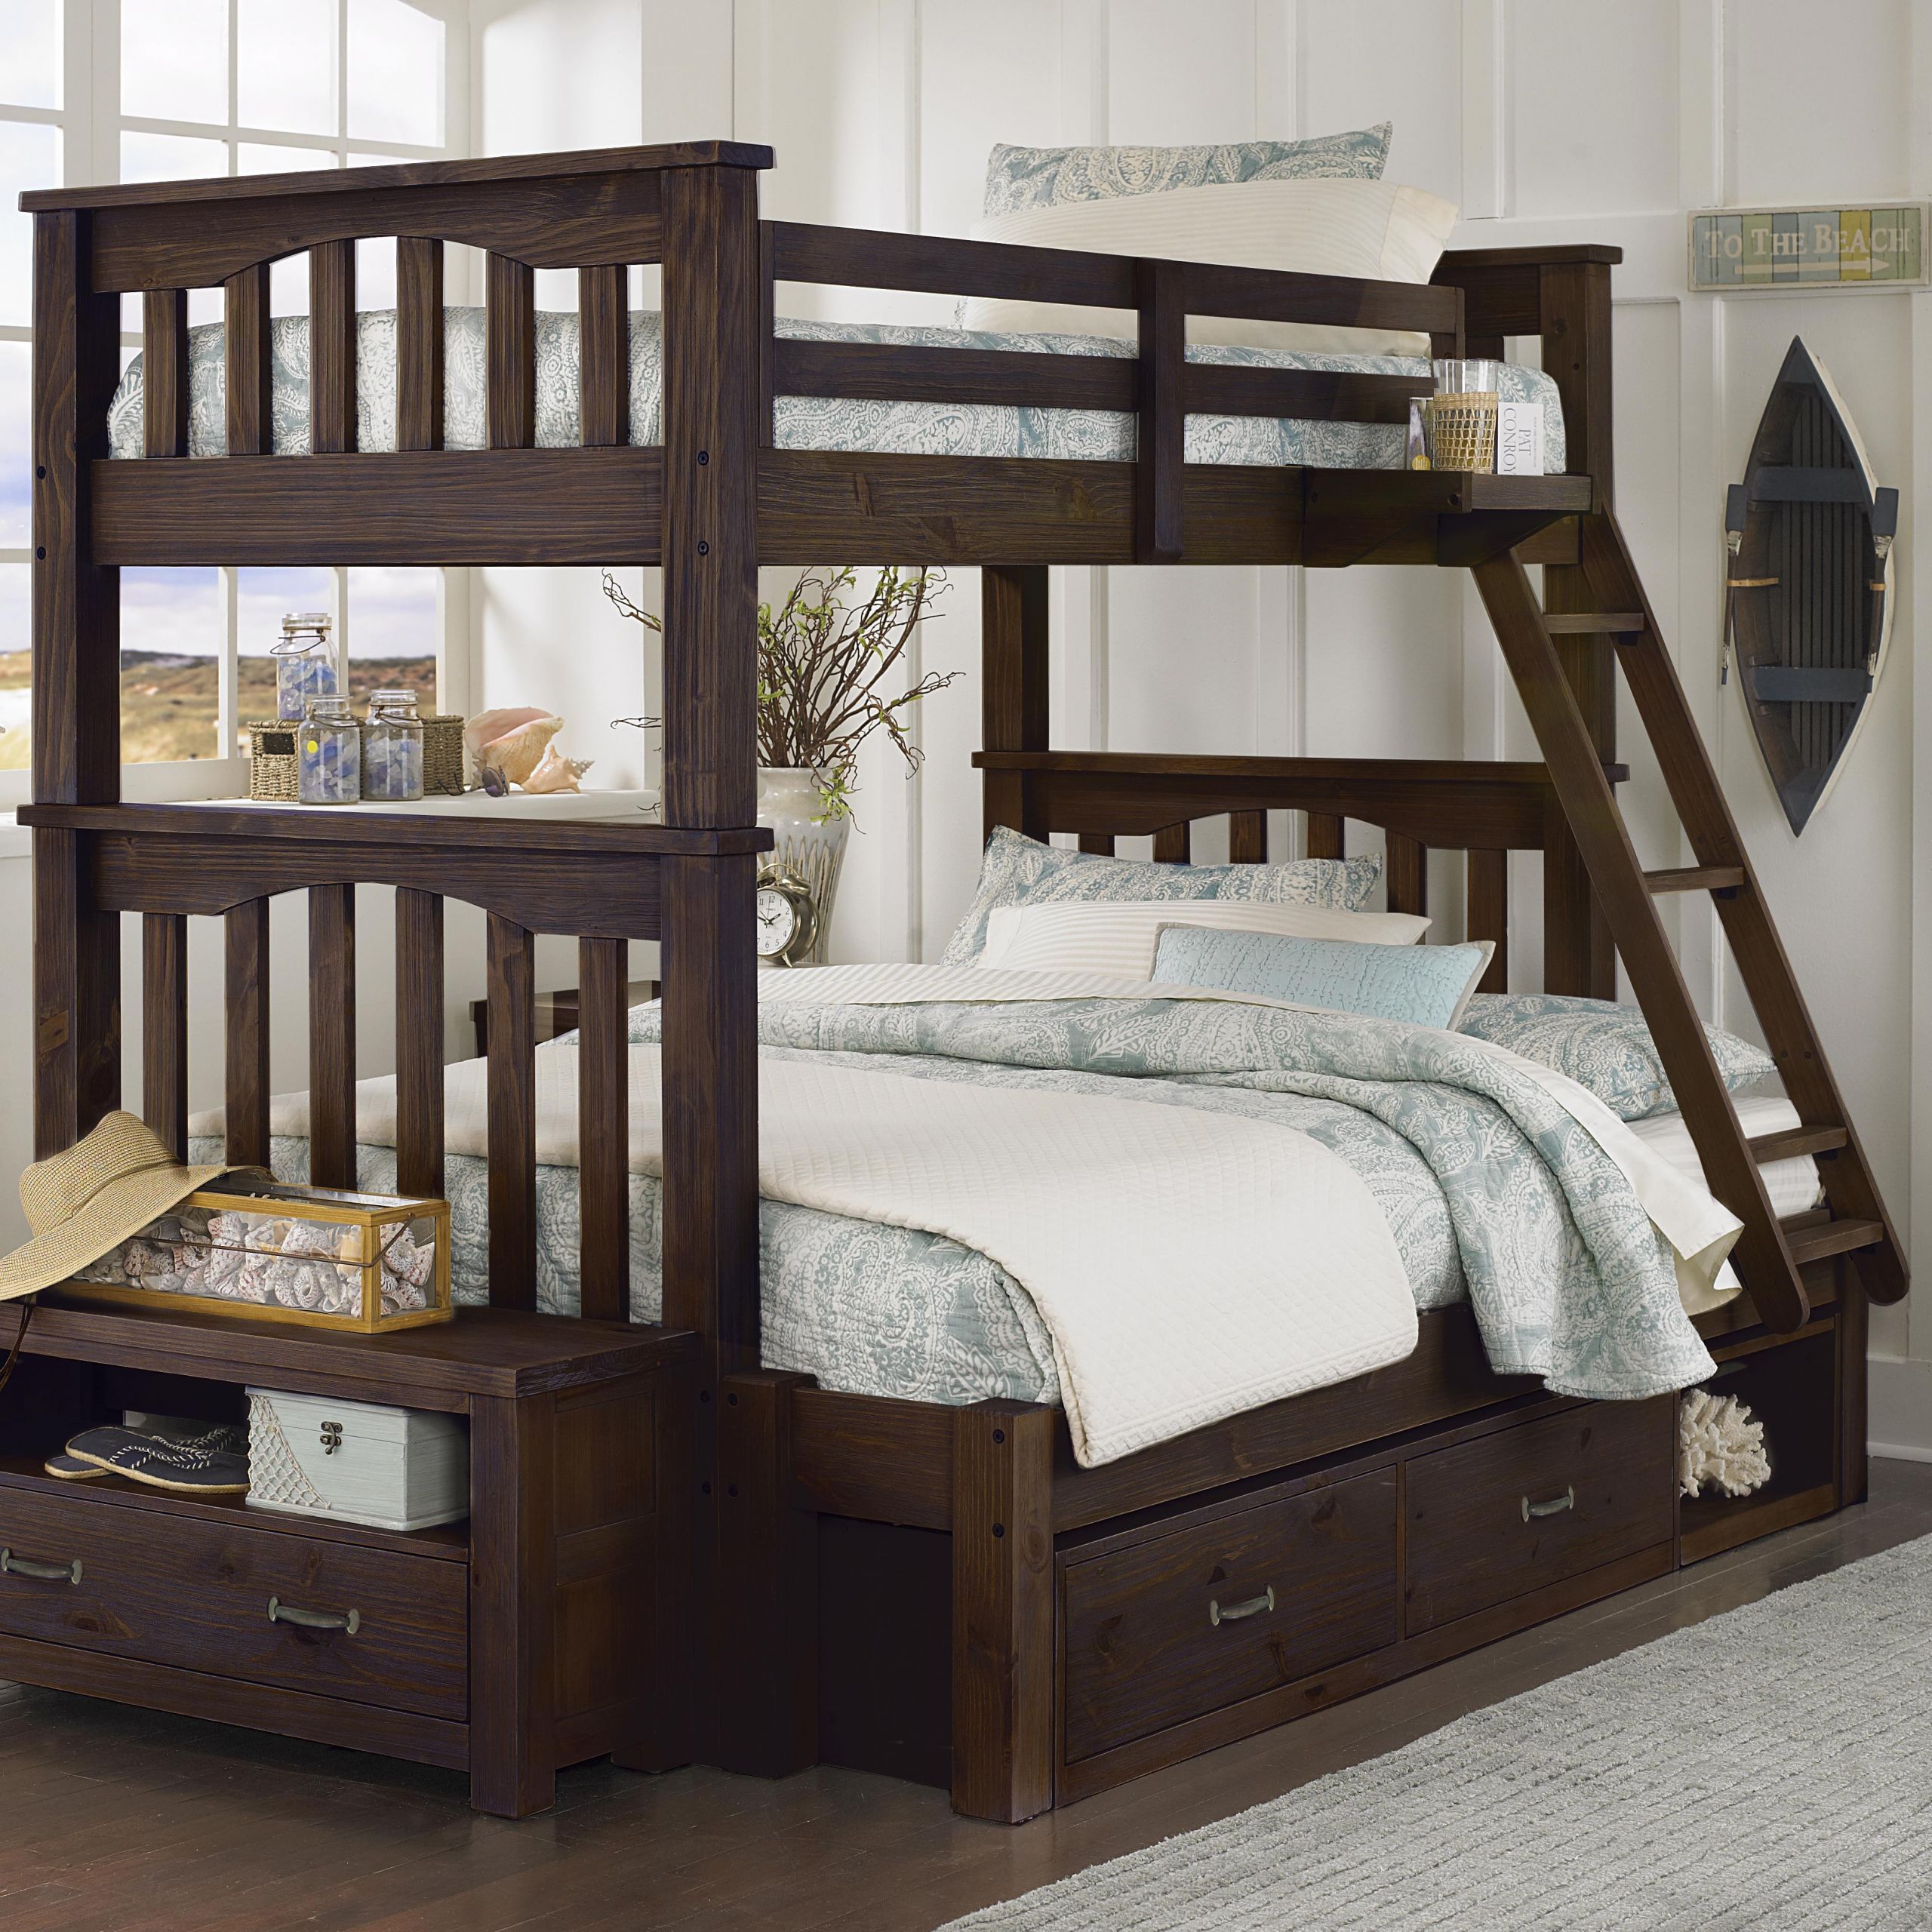 Kids Bunk Beds With Storage
 NE Kids Highlands Mission Style Twin Over Full Harper Bunk